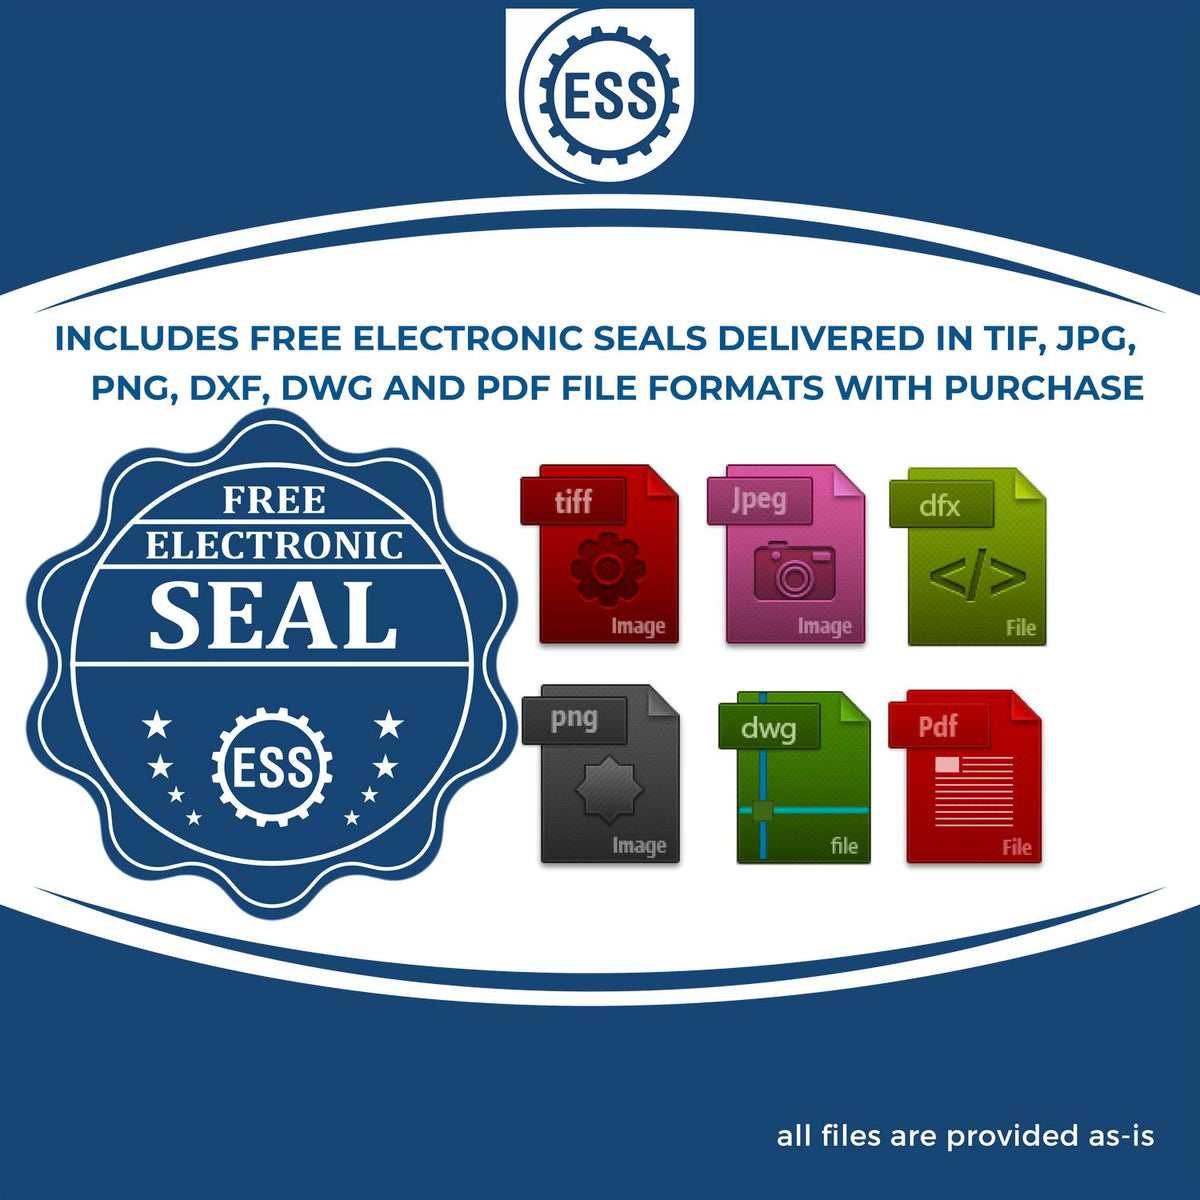 An infographic for the free electronic seal for the Premium MaxLight Pre-Inked Wyoming Geology Stamp illustrating the different file type icons such as DXF, DWG, TIF, JPG and PNG.